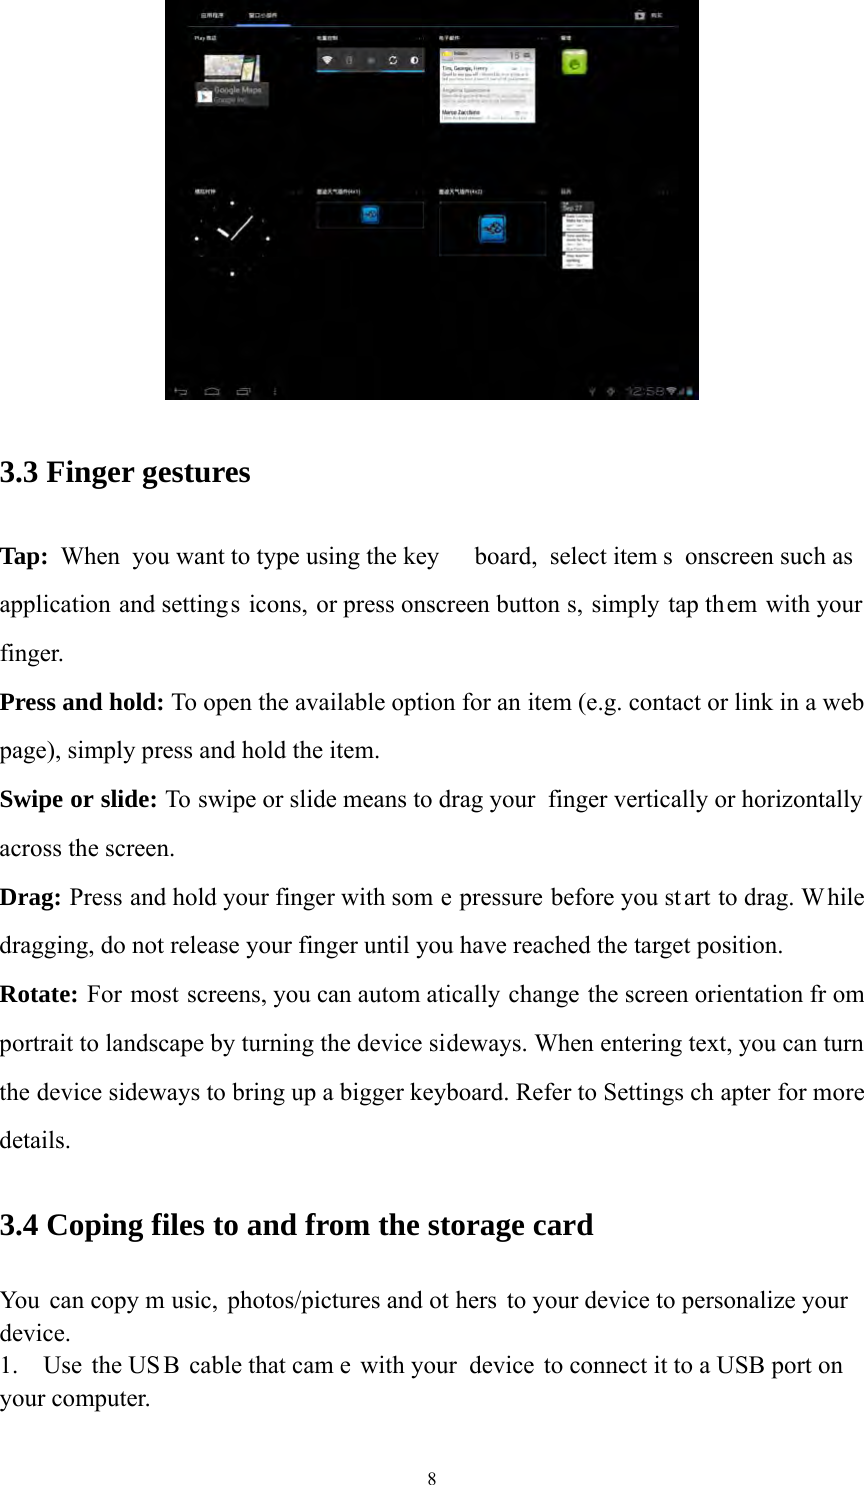 8  3.3 Finger gestures Tap: When you want to type using the key board, select item s onscreen such as application and settings icons, or press onscreen button s, simply tap them with your finger. Press and hold: To open the available option for an item (e.g. contact or link in a web page), simply press and hold the item. Swipe or slide: To swipe or slide means to drag your  finger vertically or horizontally across the screen.   Drag: Press and hold your finger with som e pressure before you st art to drag. While dragging, do not release your finger until you have reached the target position. Rotate: For most screens, you can autom atically change the screen orientation fr om portrait to landscape by turning the device sideways. When entering text, you can turn the device sideways to bring up a bigger keyboard. Refer to Settings ch apter for more details.  3.4 Coping files to and from the storage card You can copy m usic, photos/pictures and ot hers to your device to personalize your device.  1.  Use the US B cable that cam e with your  device to connect it to a USB port on your computer.   